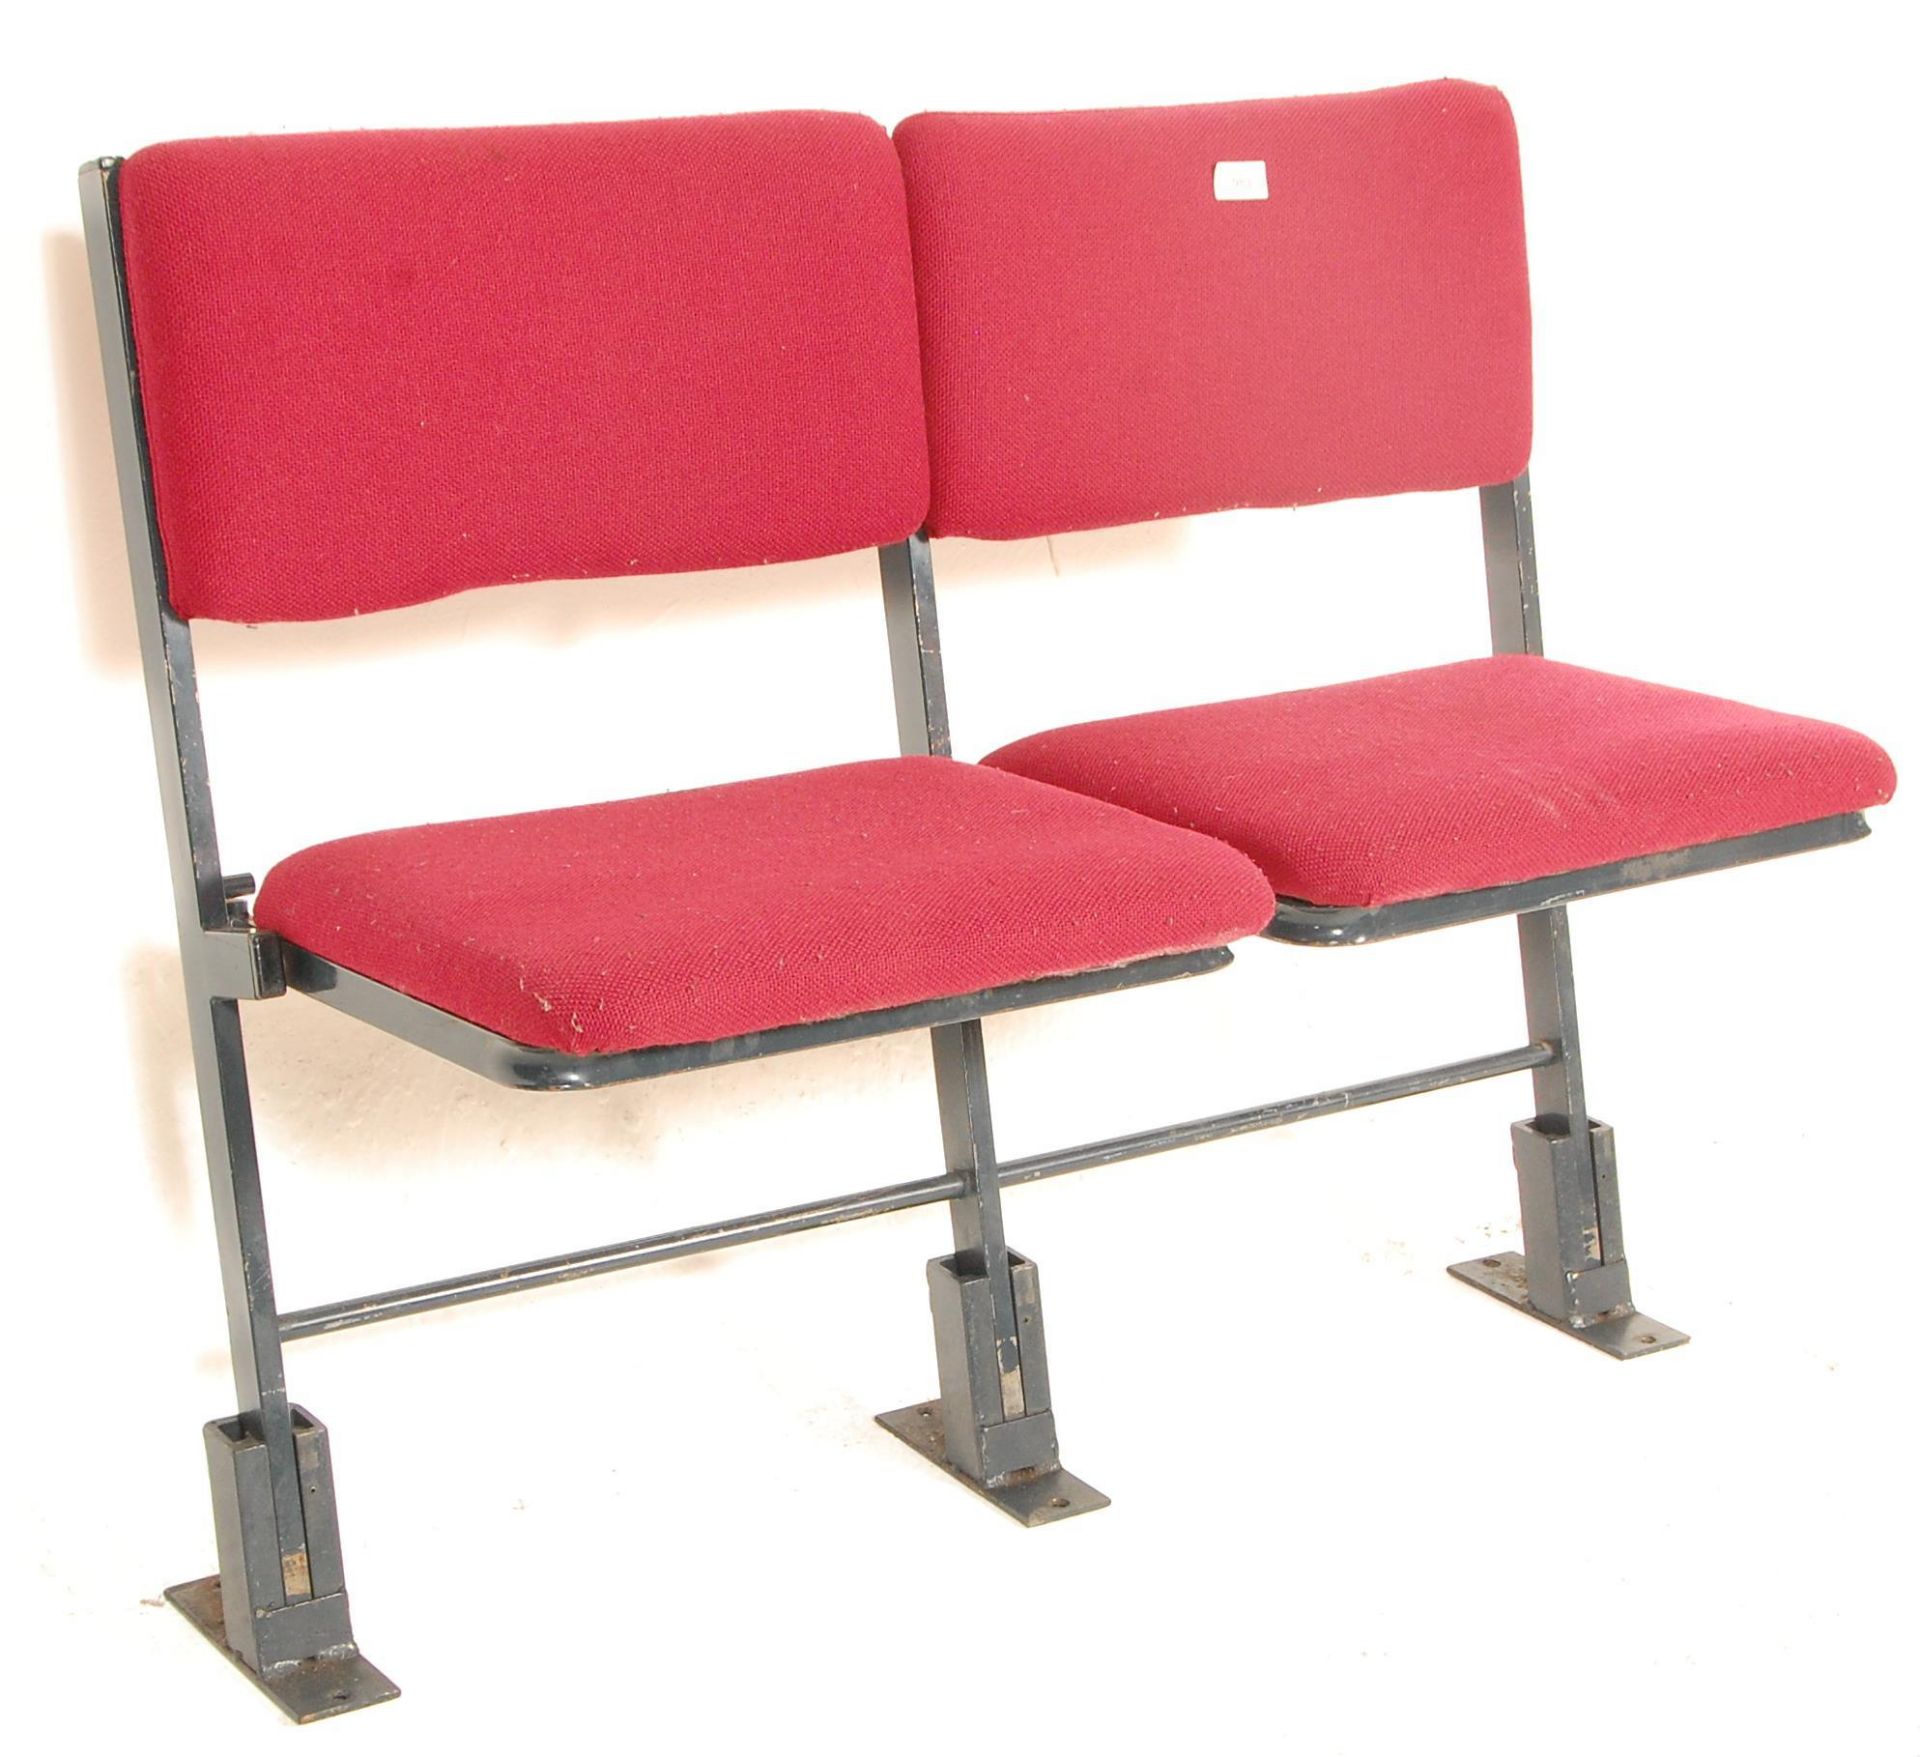 A set of two vintage retro 20th Century folding cinema / theatre chairs having red upholstered block